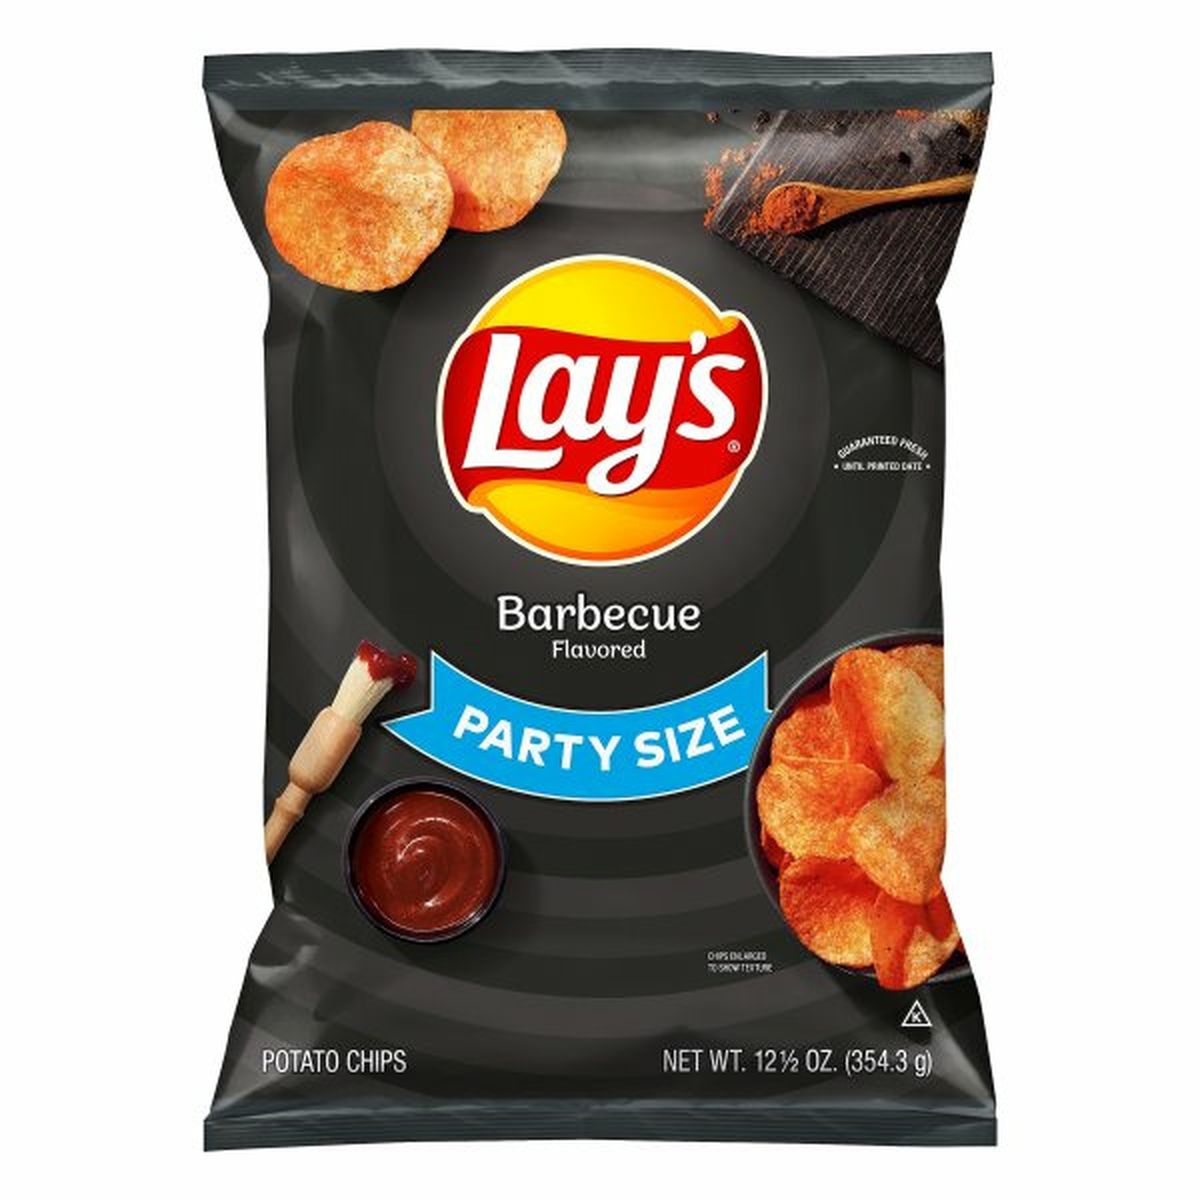 Calories in Lay's Potato Chips, Barbecue Flavored, Party Size